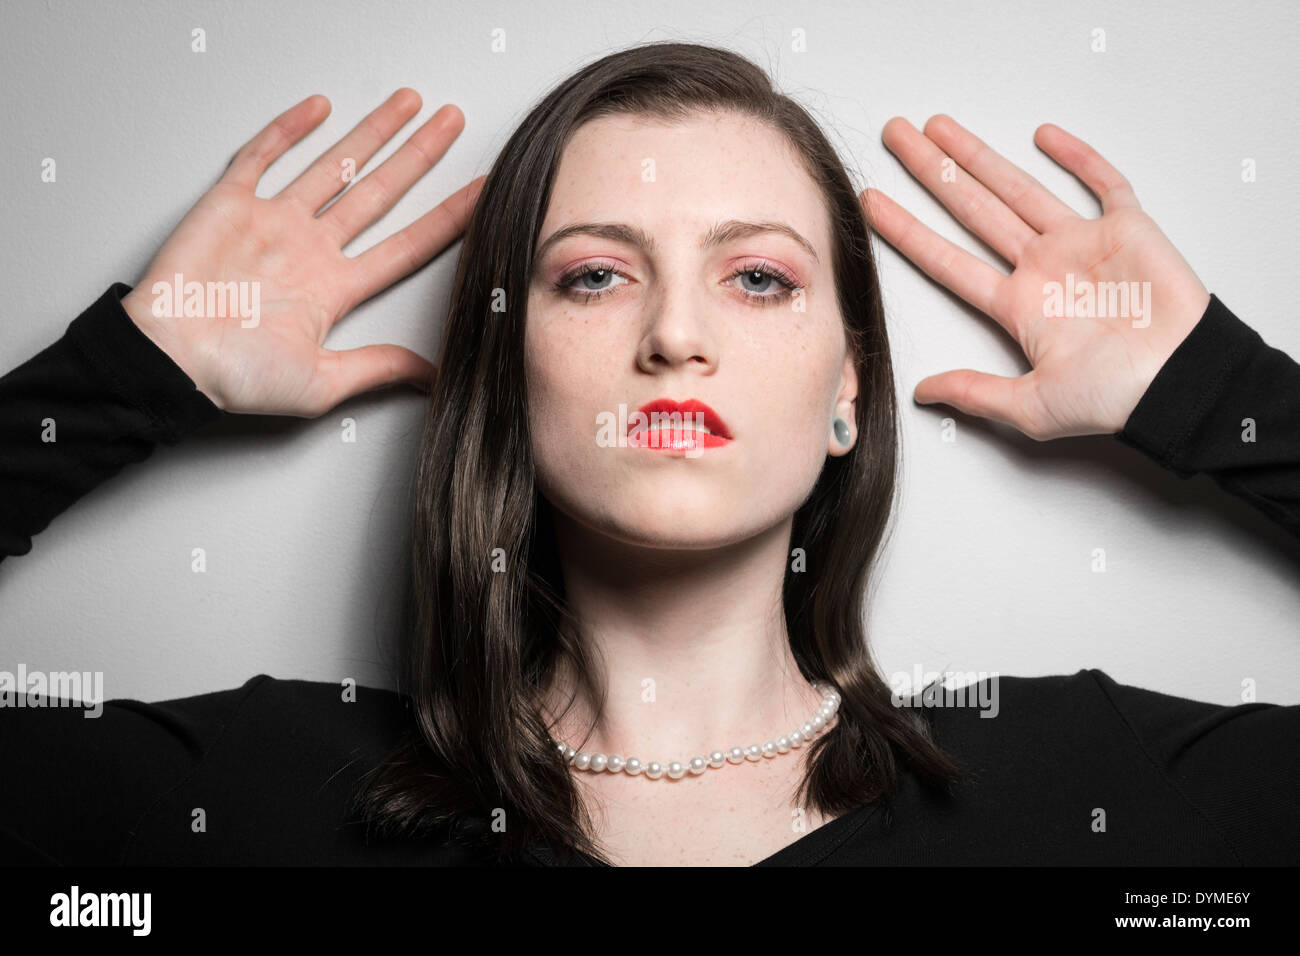 Young female model with hands on wall and red lipstick Stock Photo